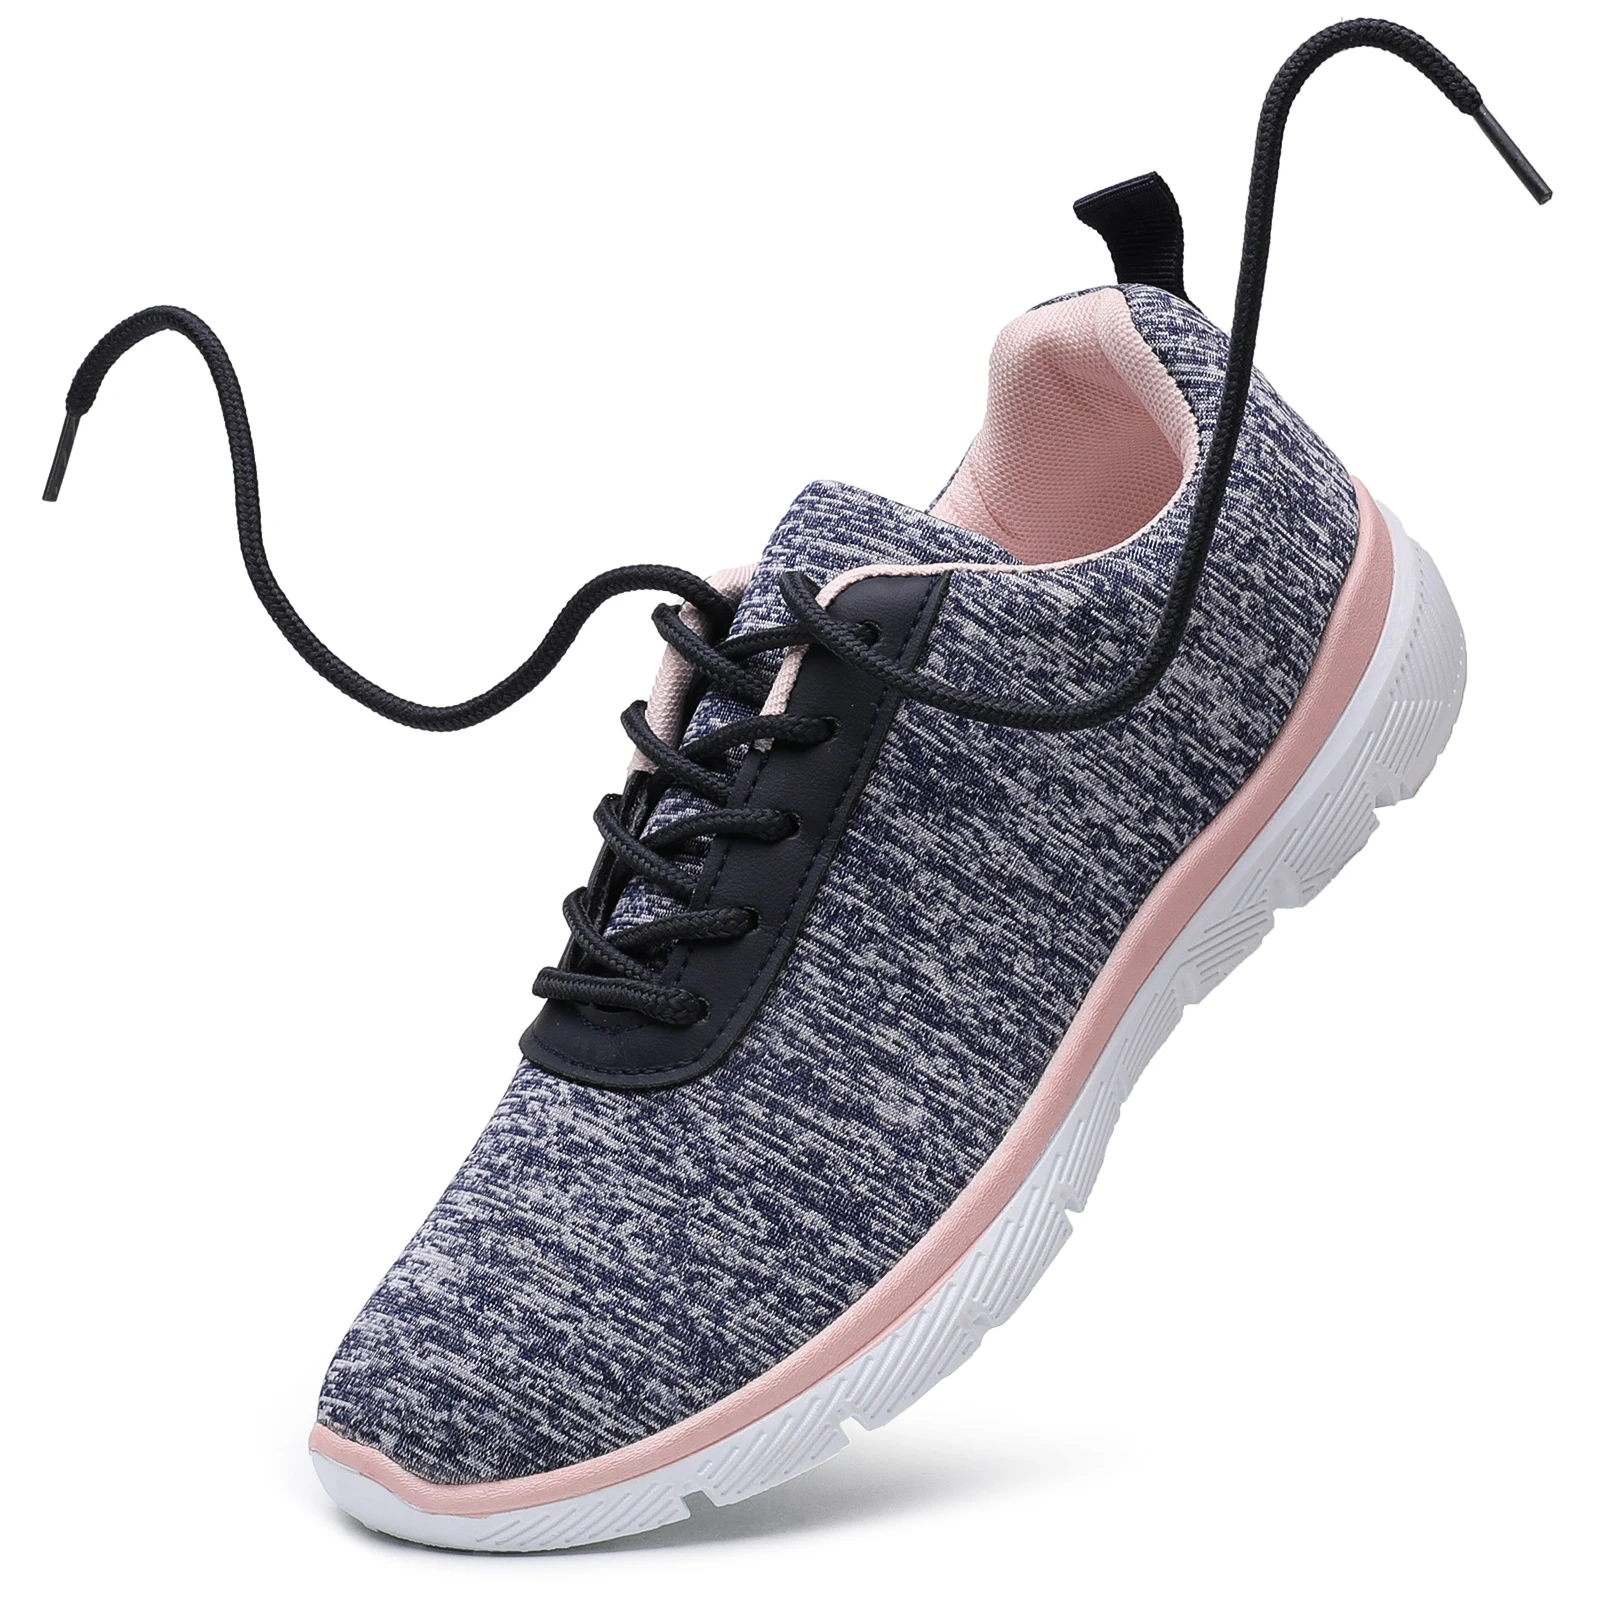 Womens Tennis Running Shoes Walking shoes Lace Up Walking Shoes Lightweight Mesh Athletic Slip on Sneakers for Women